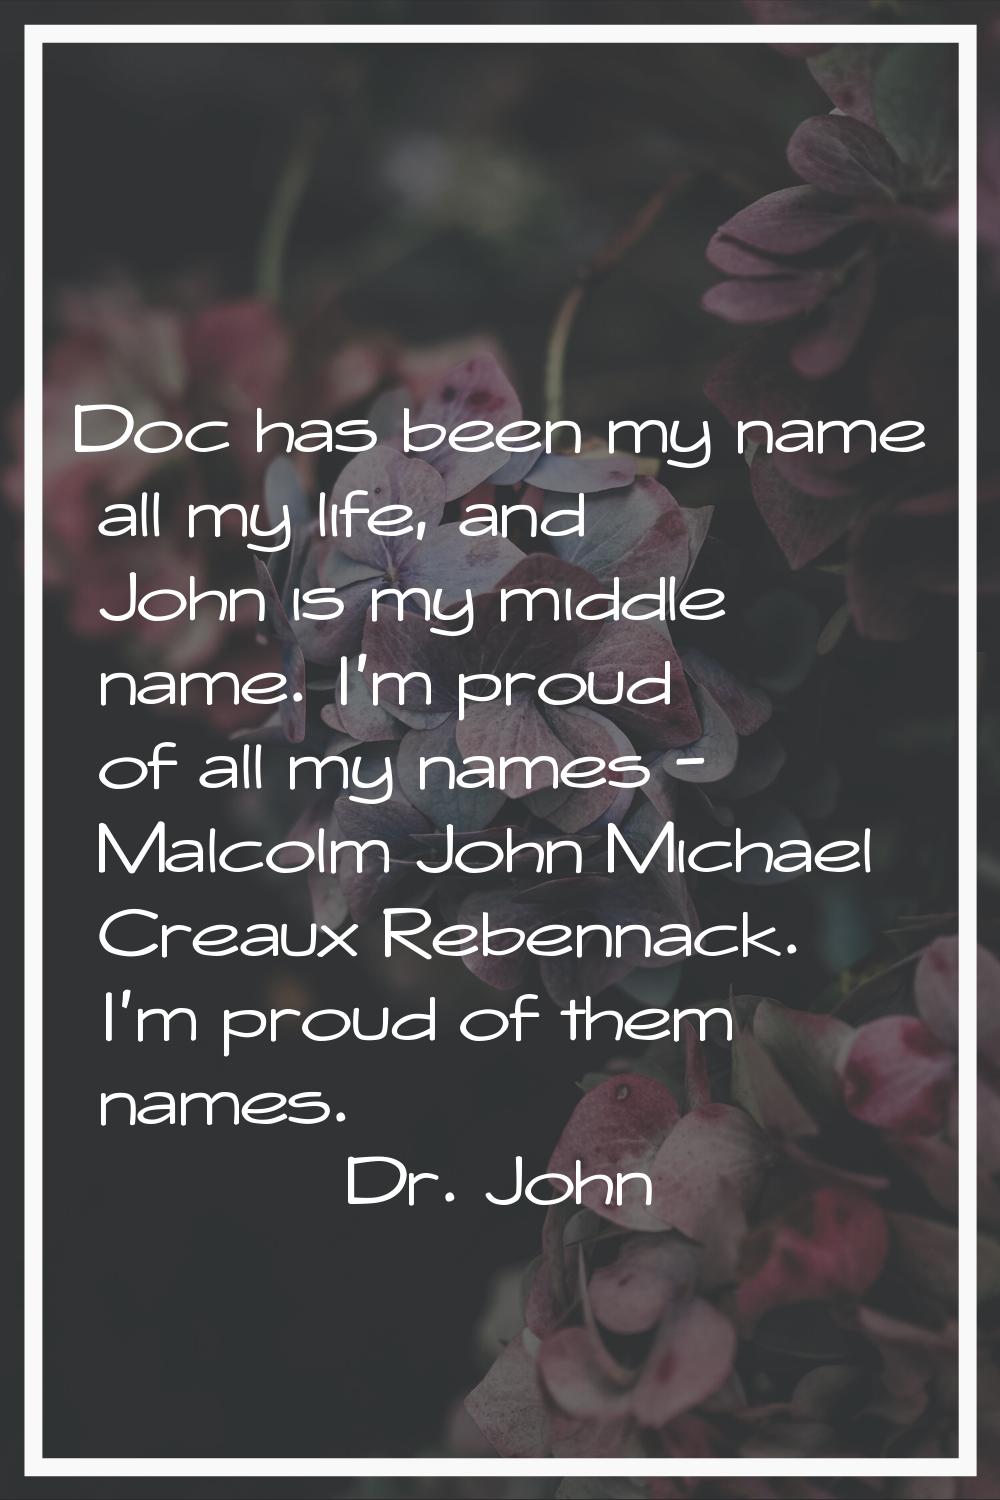 Doc has been my name all my life, and John is my middle name. I'm proud of all my names - Malcolm J